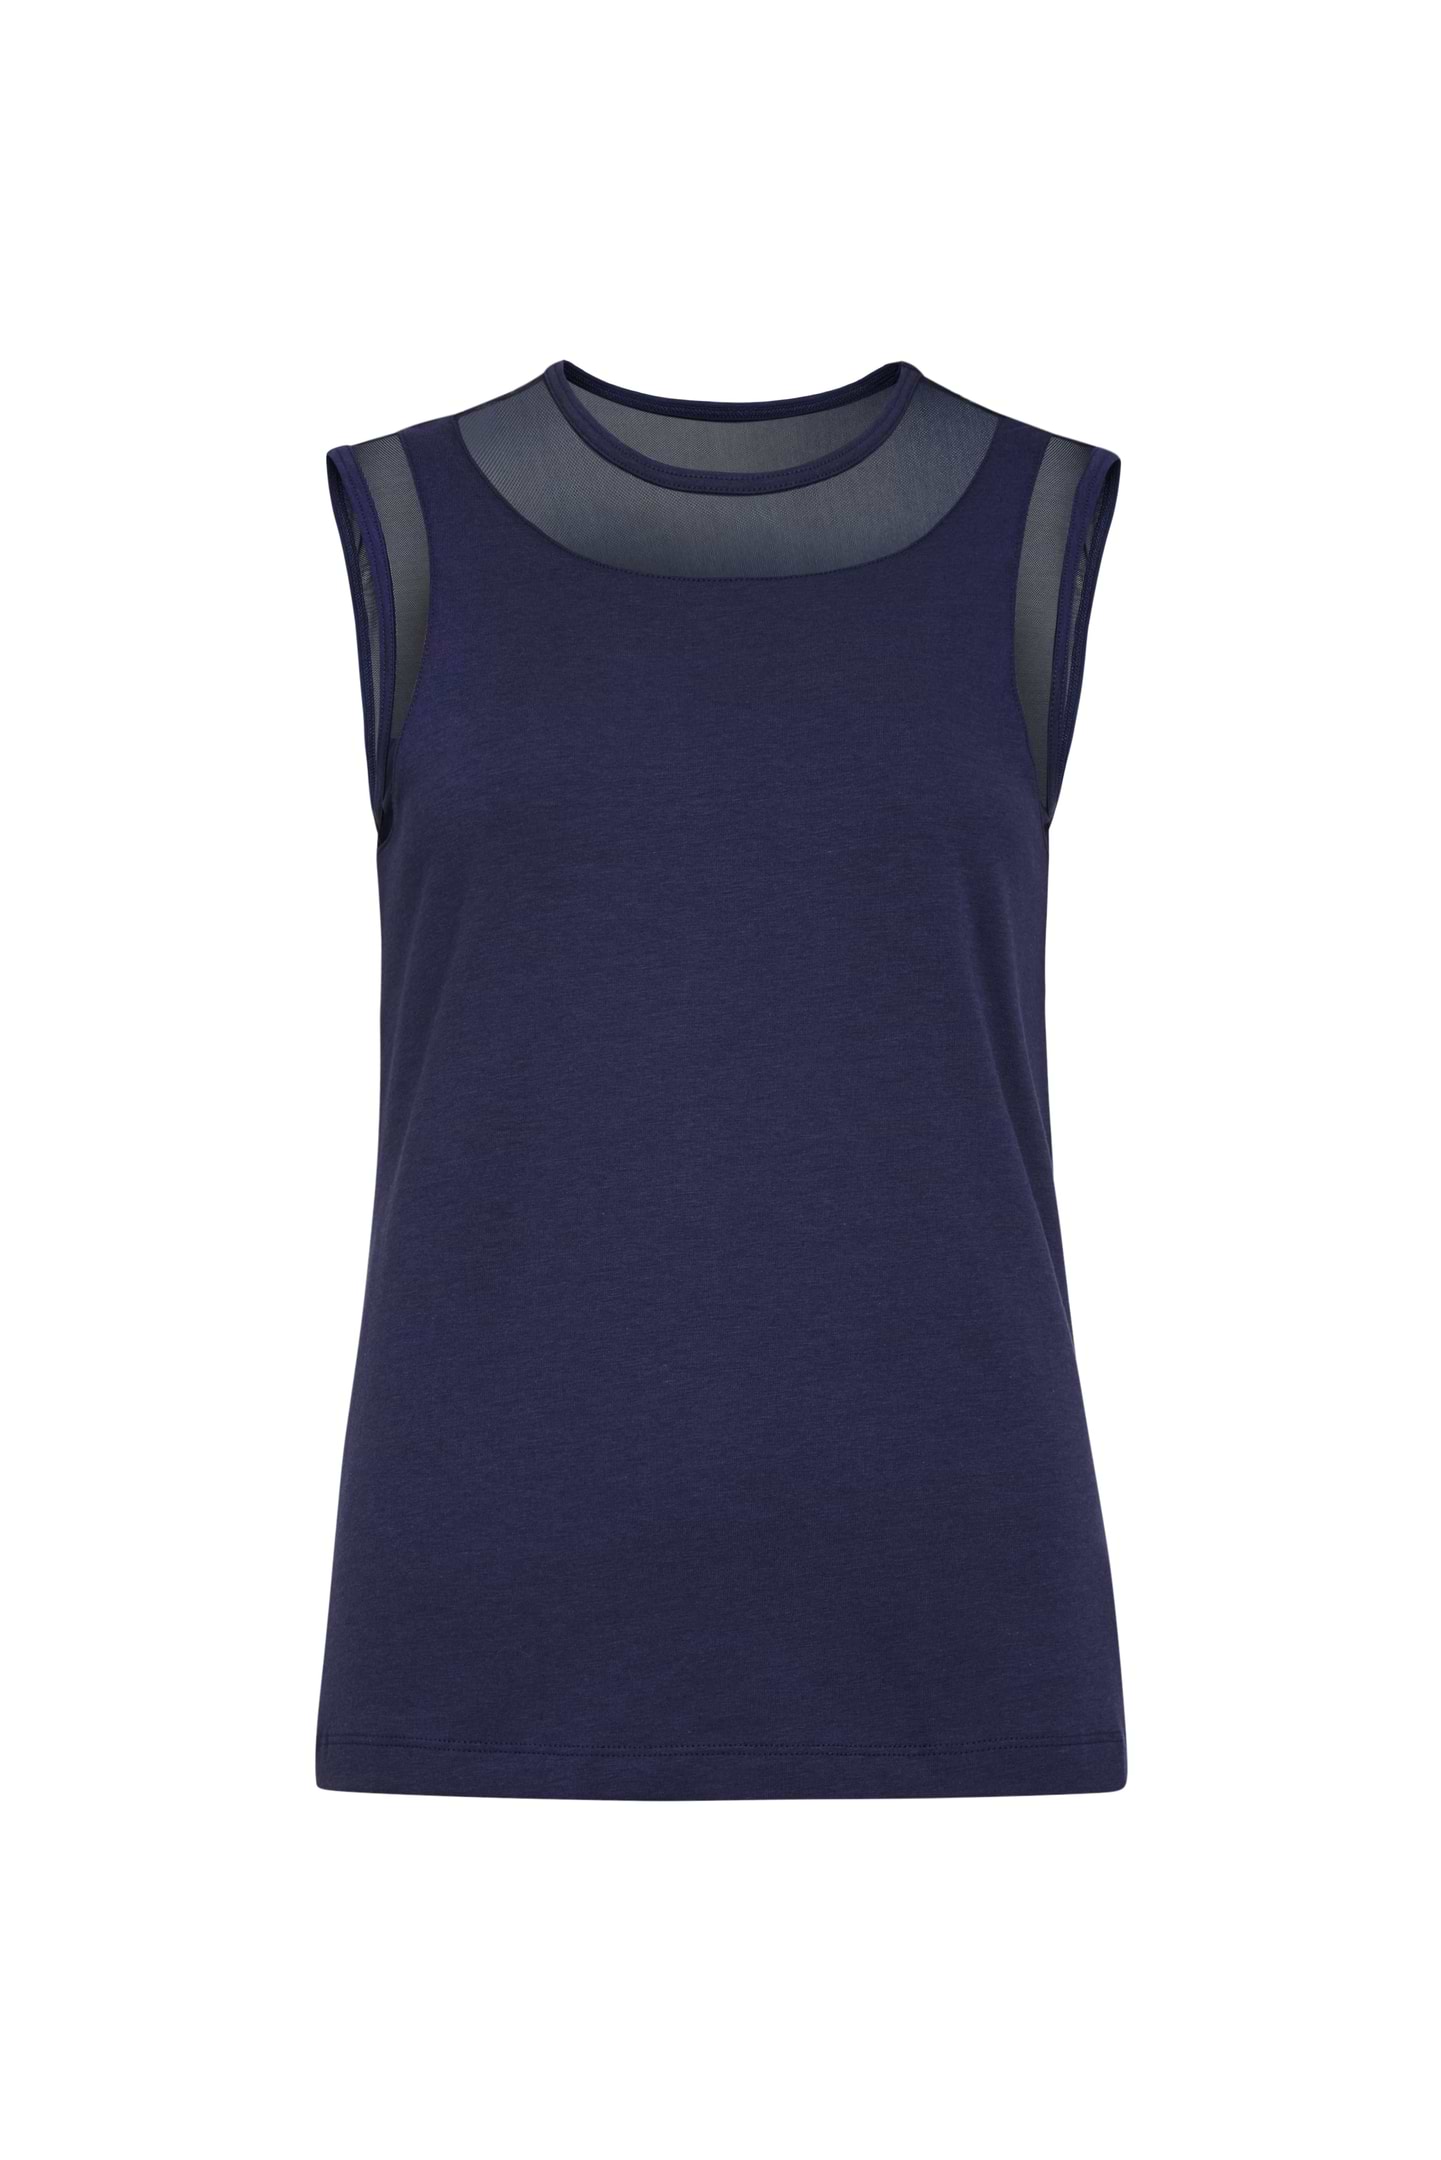 The Best Travel Tank Top. Flat Lay of a Flo Pima Cotton Tank in Navy